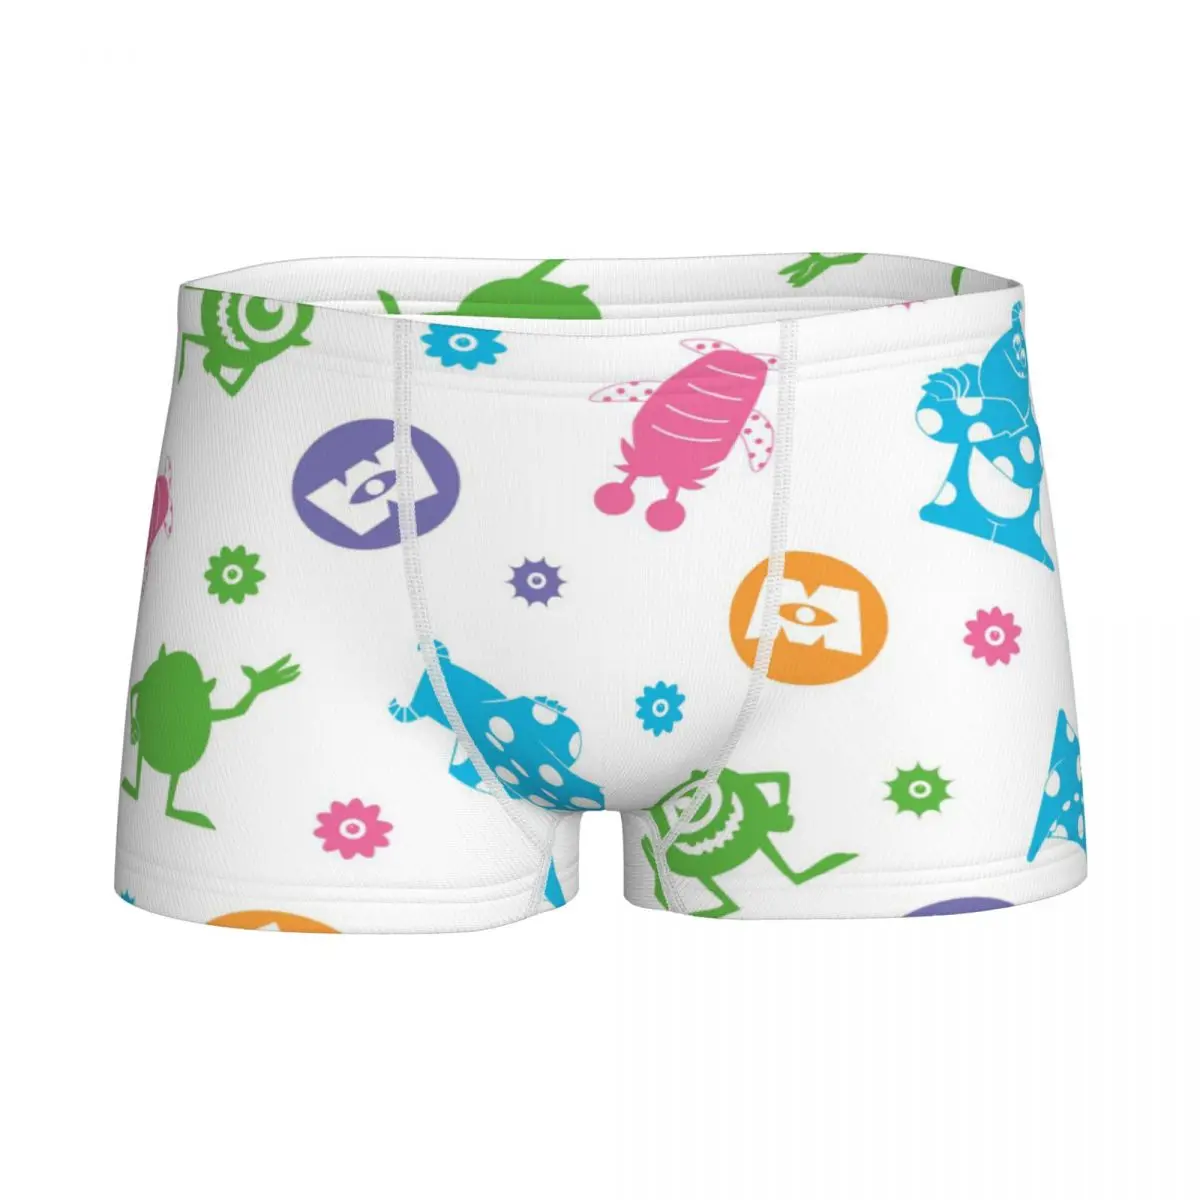 

Boys Monster Cartoon Anime Plaid Boxers Cotton Young Underwear Men Shorts Funny Teenagers Underpants